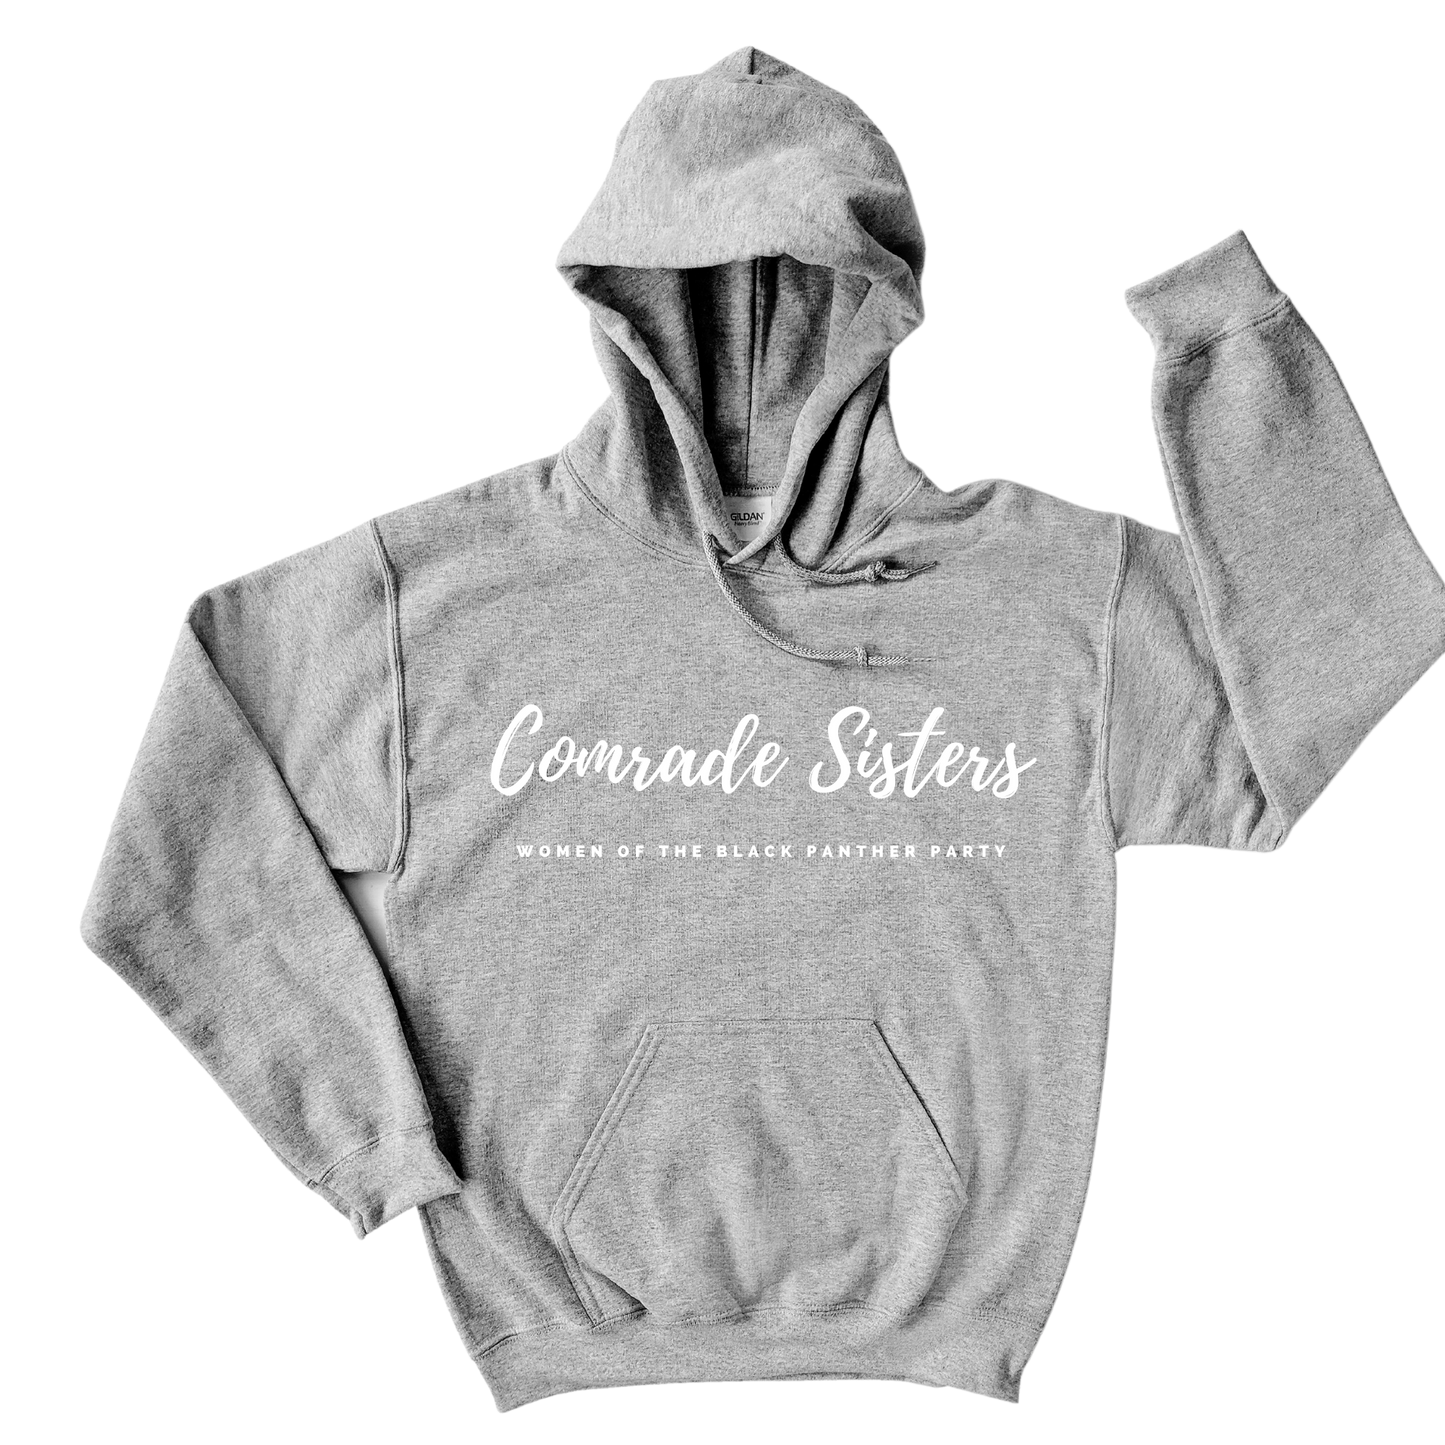 EXCLUSIVE Commemorative Comrade Sisters Women of the Black Panther Party Hoodie